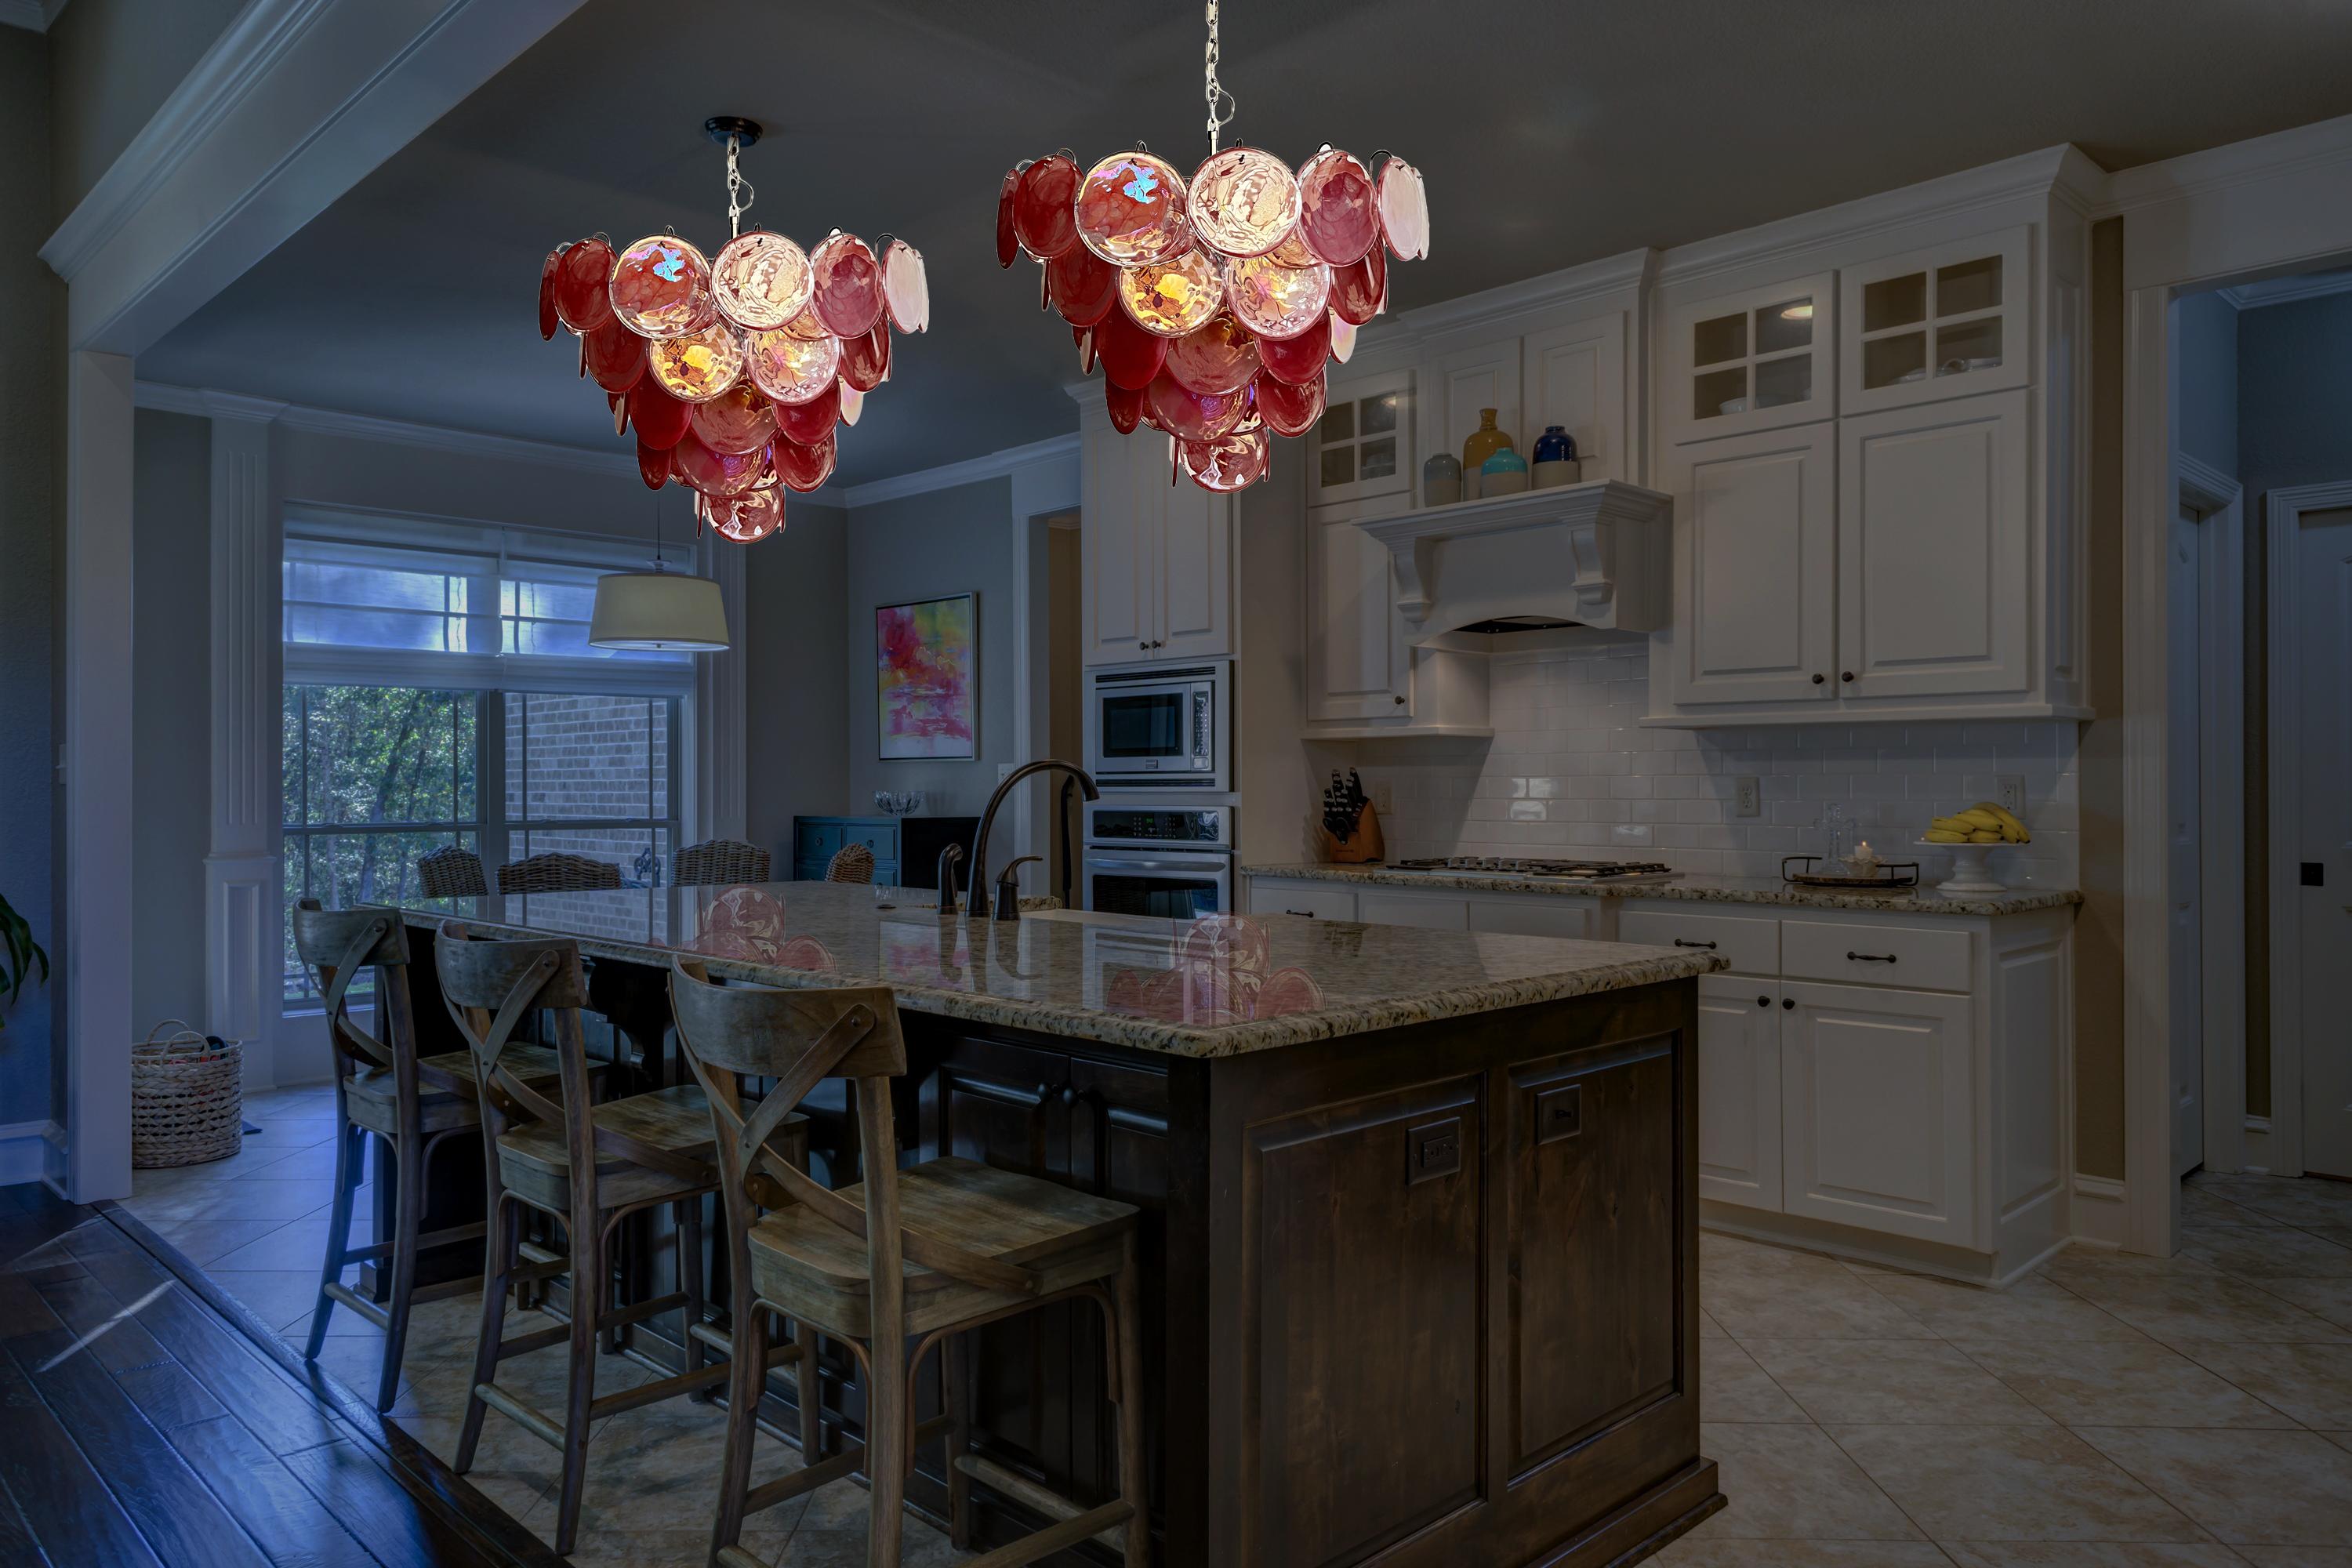 Italian Murano chandeliers. Each chandelier has 57 Murano PINK alabaster iridescent glass disks. The glasses are now unavailable, they have the particularity of reflecting a multiplicity of colors, which makes the chandelier a true work of art.